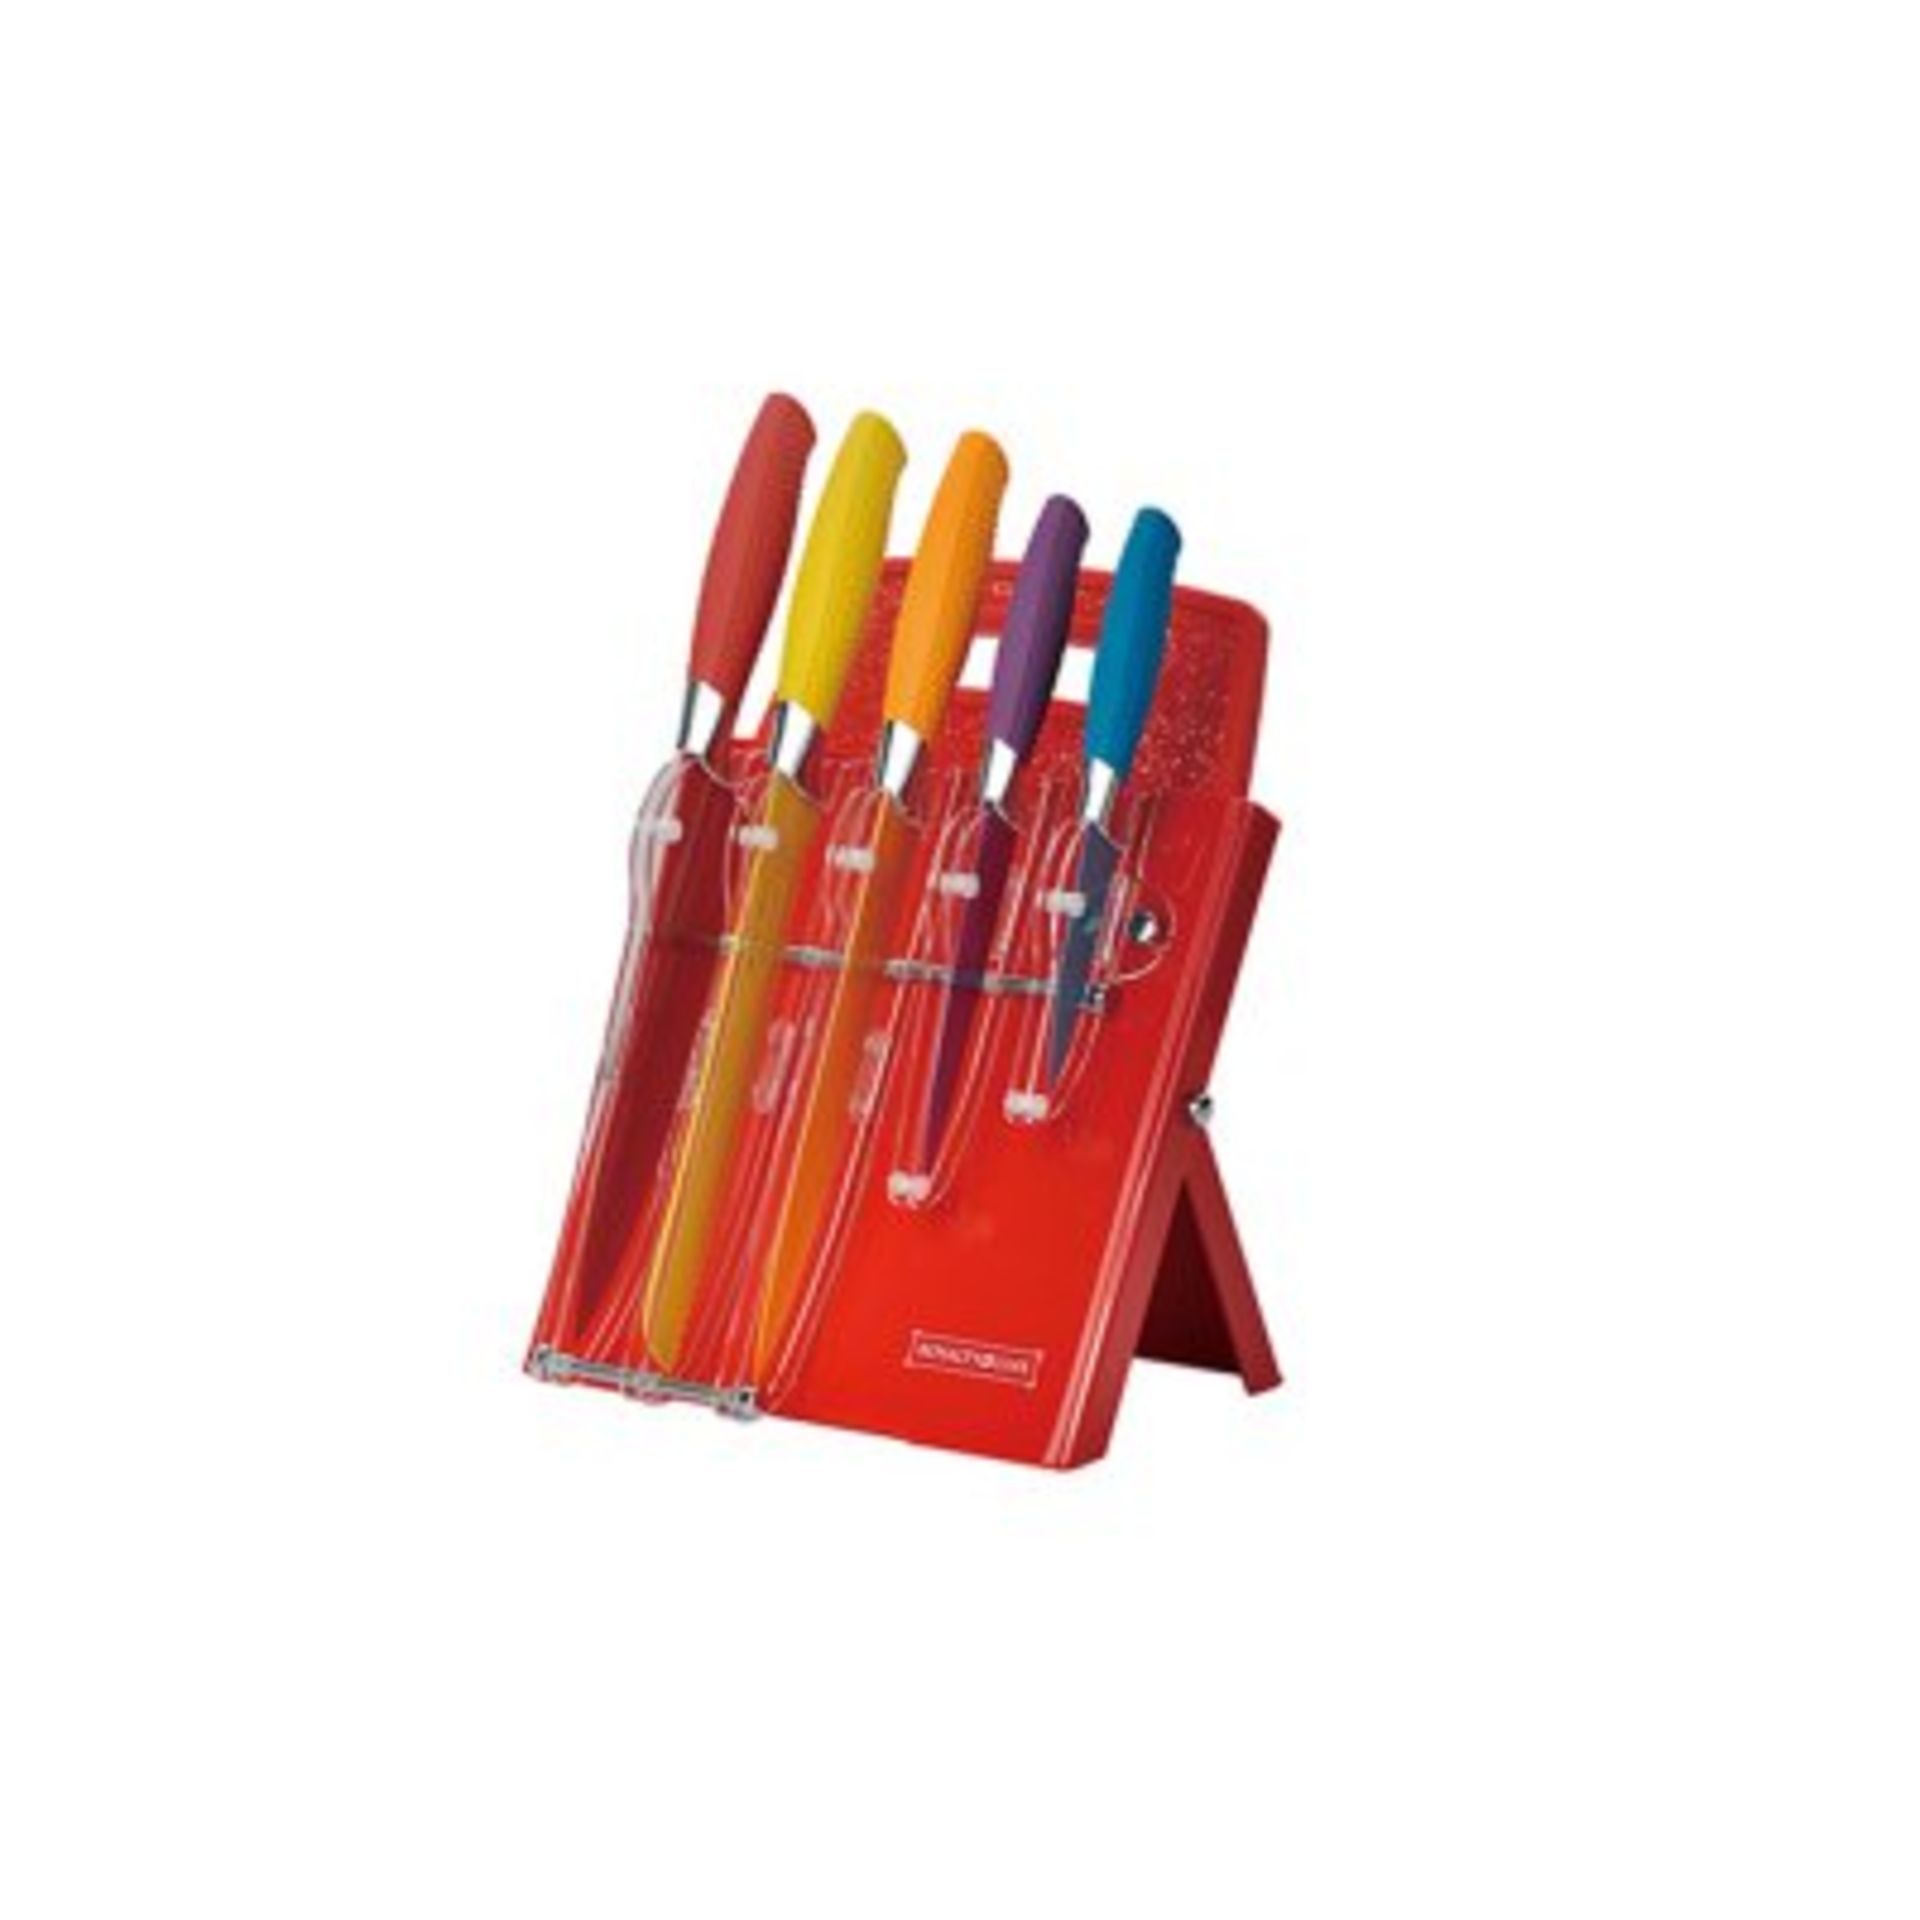 V 7pc Coloured Knife Set With Acrylic Stand And Cutting Board RRP 149 Euros - Image 2 of 2